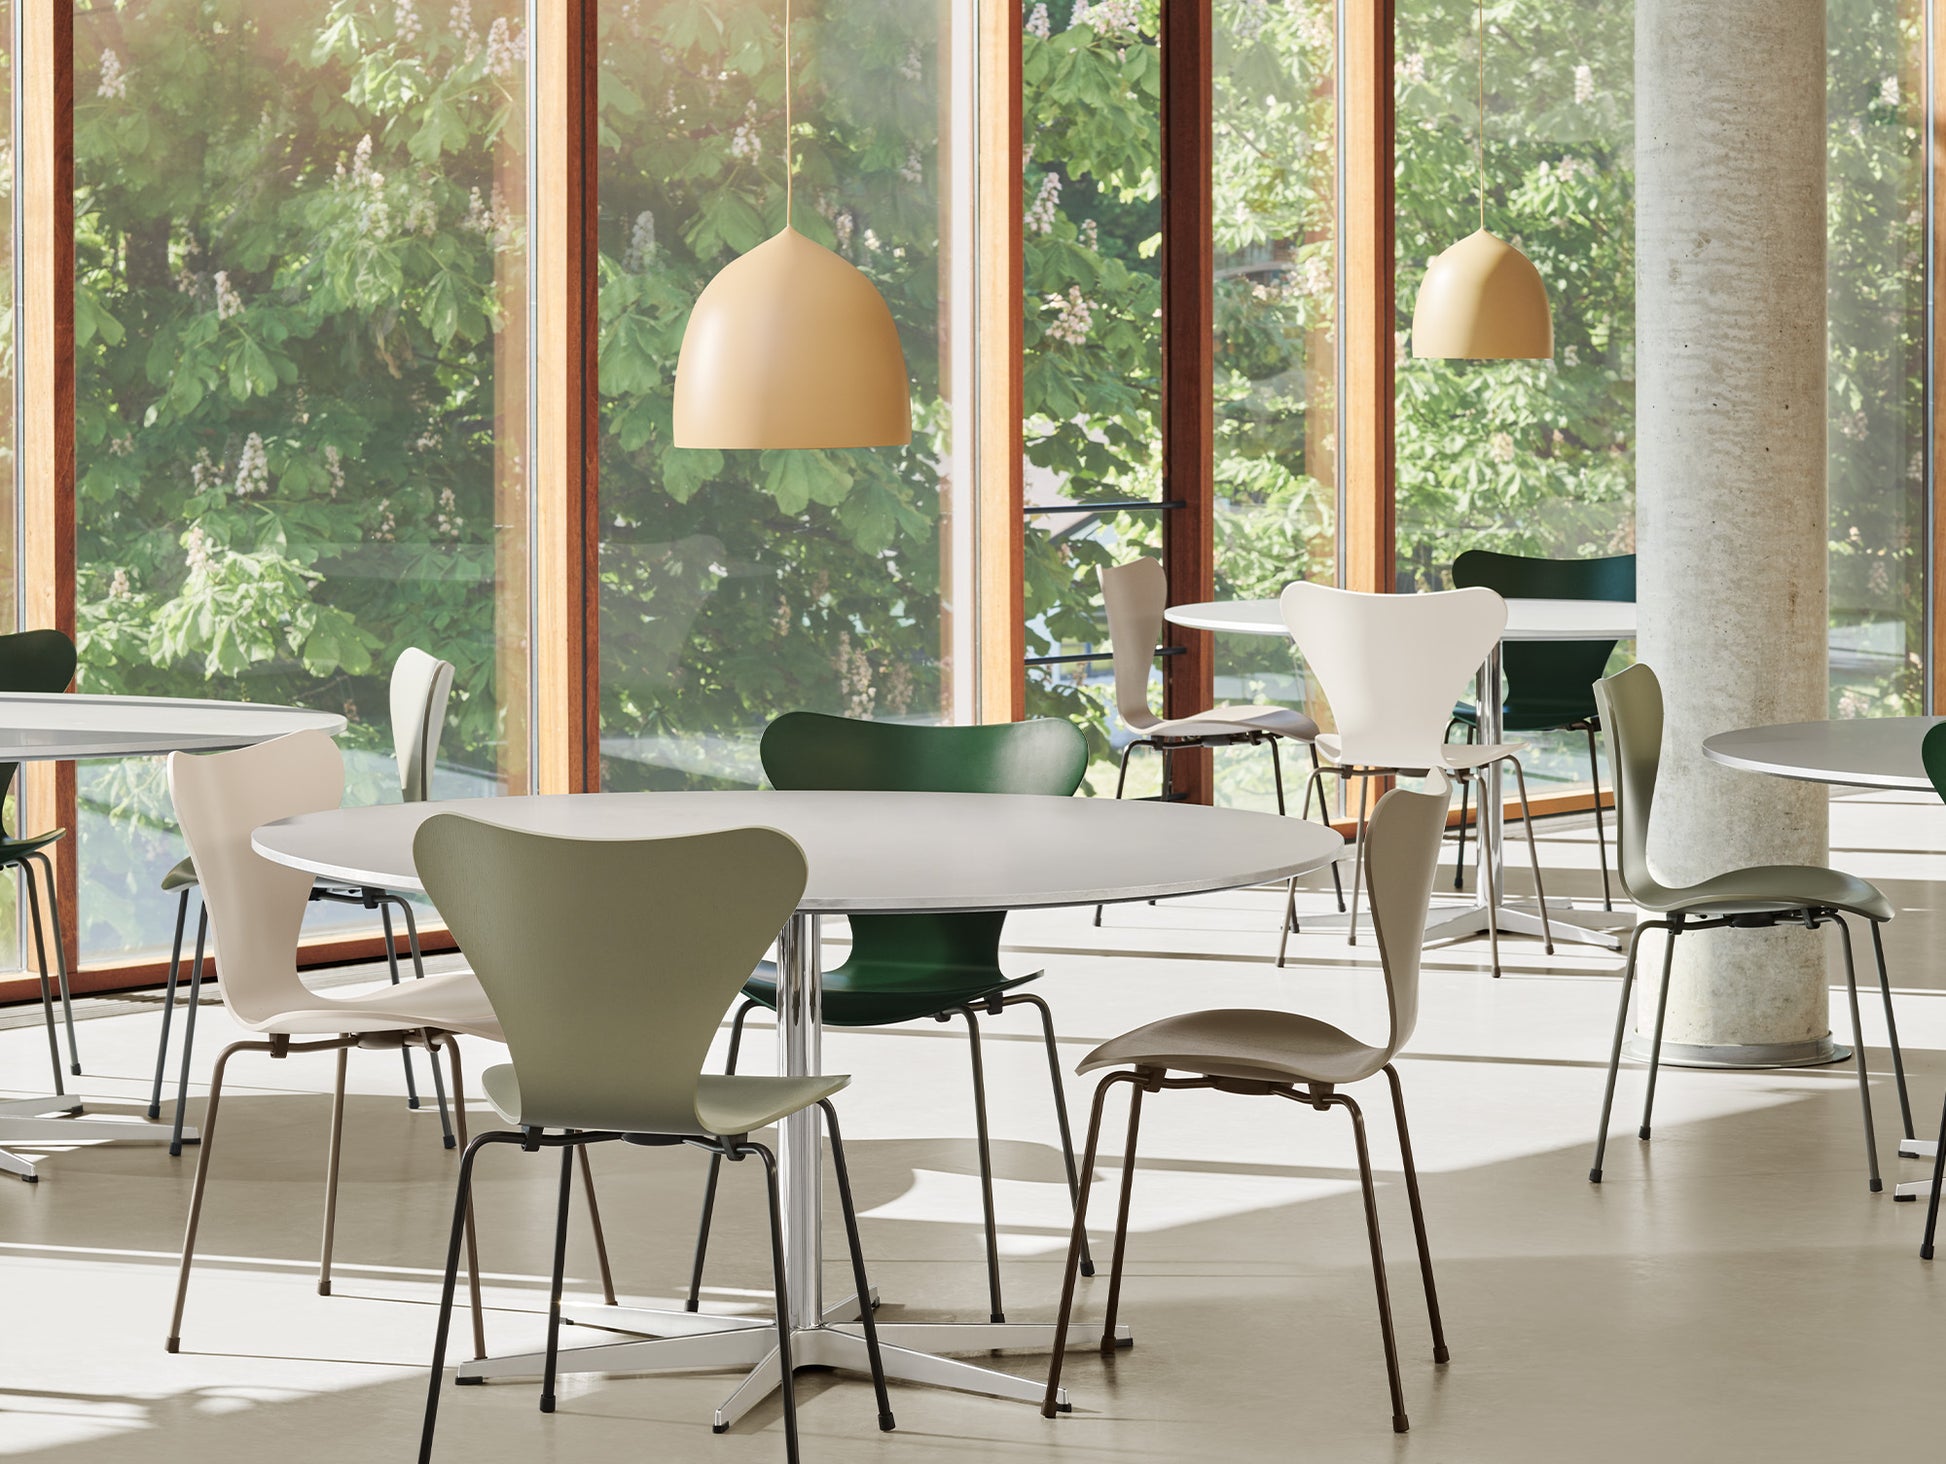 Series 7™ 3107 Dining Chair by Fritz Hansen - Olive Green, Ever Green, Light Beige 